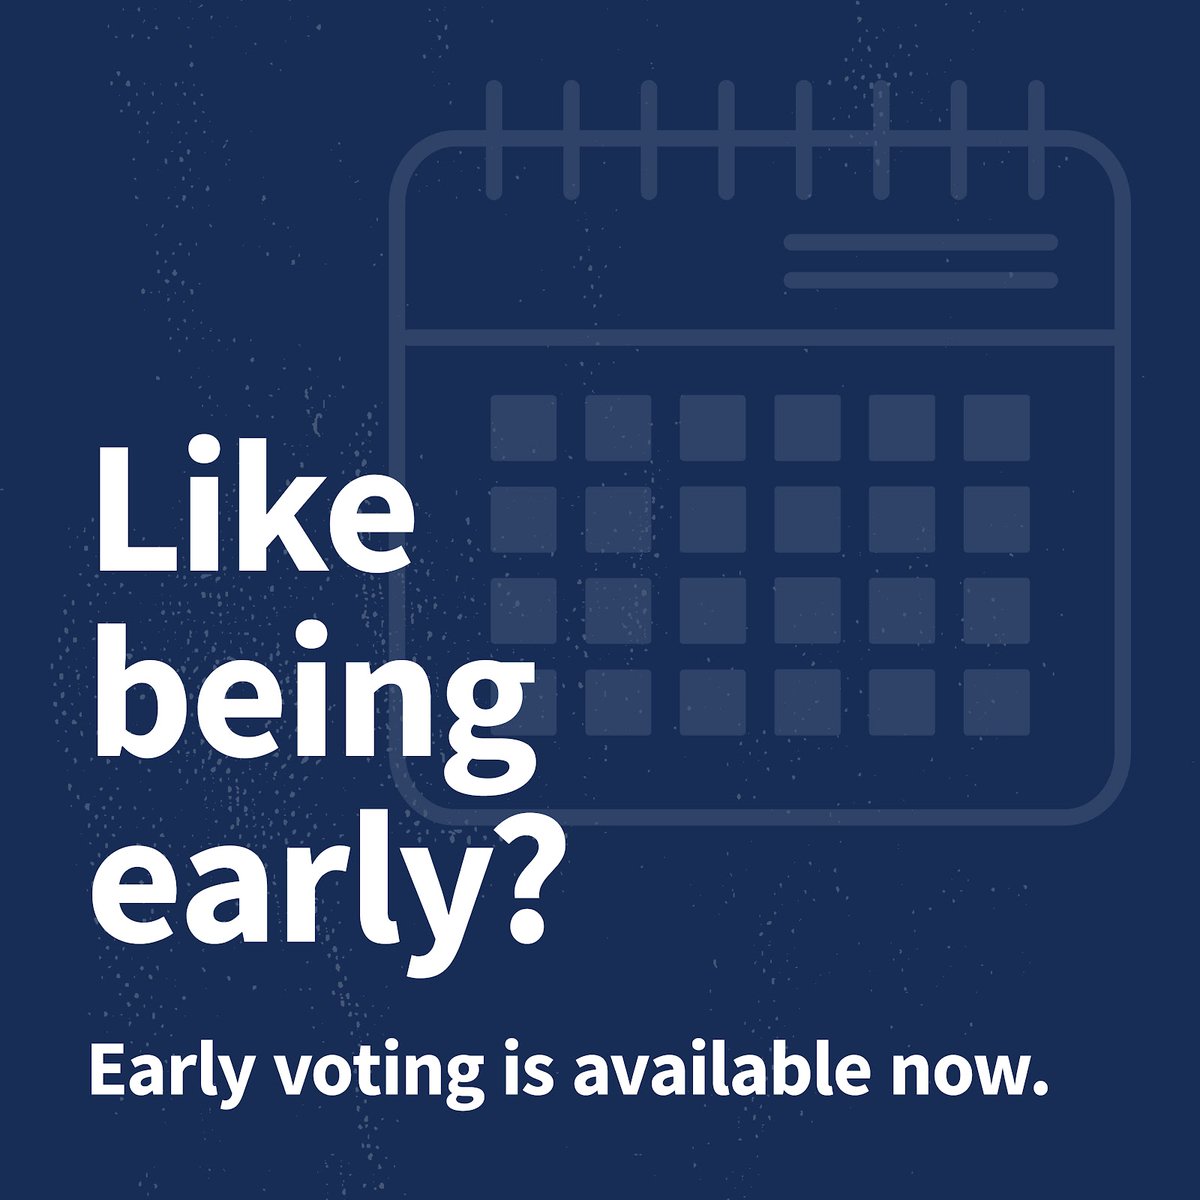 The June Primary is Tuesday, June 18th. But early voting is available now. Learn where you can vote early by visiting Vote.Virginia.gov. #VaElections2024 #VaisForVoters